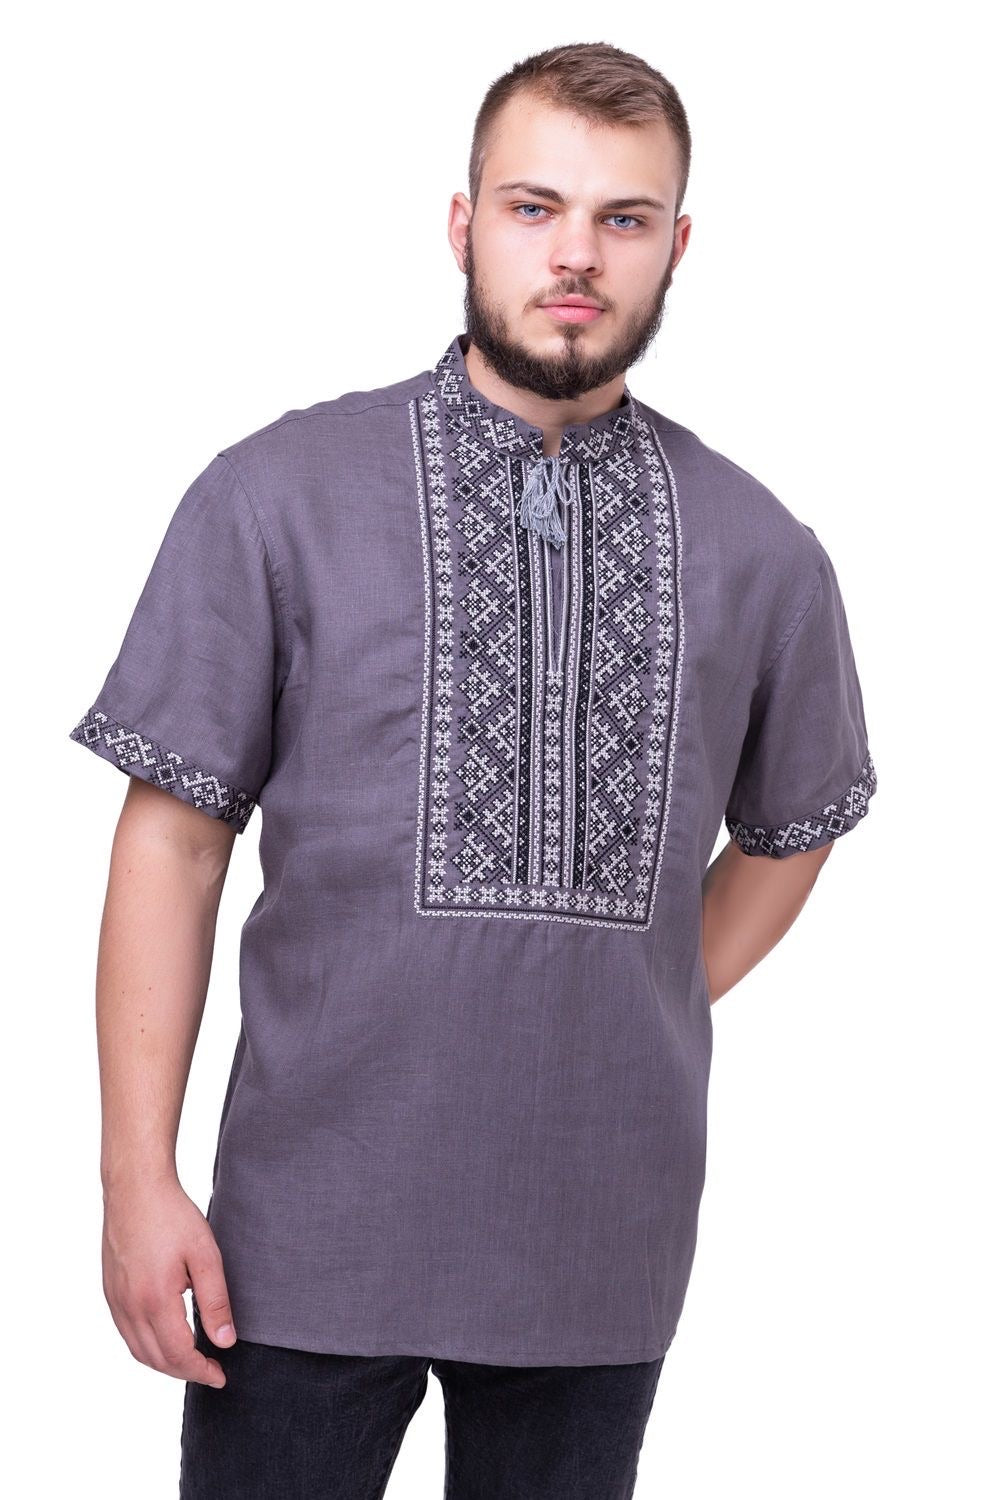 Men's Grey Embroidered Shirt